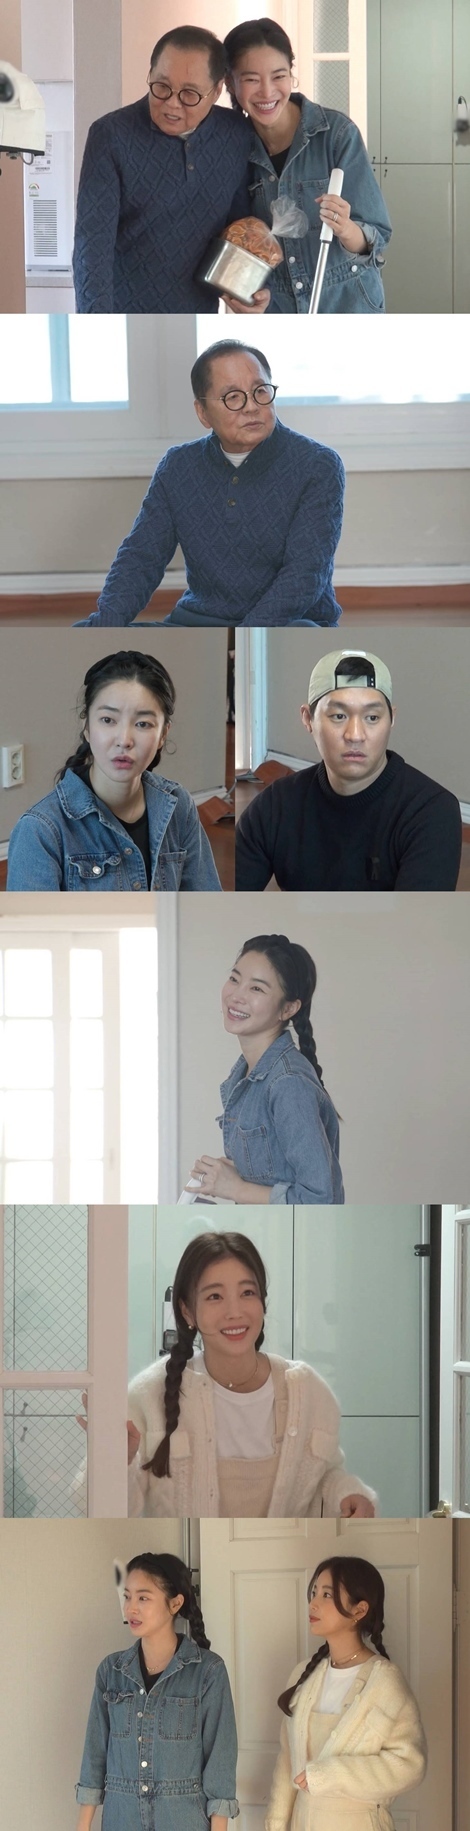 Kim Yoon-ji starts a building merger with Kim Young-im, who is strange to his parents.SBS Same Bed, Different Dreams 22-Youre My Destiny (hereinafter You Are My Destiny), which is broadcasted at 11:10 pm on February 28, reveals the twists and turns of the couple Kim Yoon-ji, who lived in a building with his in-laws.Recently, Kim Yoon-ji Choi Woo-sung left the newlyweds house where they lived and moved to the building where his parents-in-law, Kim Young-im, lives.While her daughter-in-law Kim Yoon-ji actively promoted the move, her husband Choi Woo-sung opposed the move.Kim Yoon-ji, who lived in the upper house and the lower house, was surprised by Kim Young-im, who was preparing to move to Kim Yoon-ji.Strangely, he made a bomb remark to his daughter-in-law Kim Yoon-ji, who lived in a building, and stunned Kim Yoon-ji.It raises the question of what the bomb remarks of the strange year that made the daughter-in-laws conversation cool.Kim Yoon-ji later challenged Self Interiors.Kim Yoon-ji has prepared a variety of equipment and invited actor Ki Eun-se as an assistant to raise expectations.Ki Eun-se, known as the god of Interiors, has become a hot topic by revealing the European Sensibility House, which I personally have Interiors, to SNS.Ki Eun-se is the back door of the 2022 fashion interiors honey tips as well as professional force to reveal the advanced skills generously, and everyones admiration.Ki Eun-ses Interiors know-how, which is as good as an expert, is released through broadcasting.